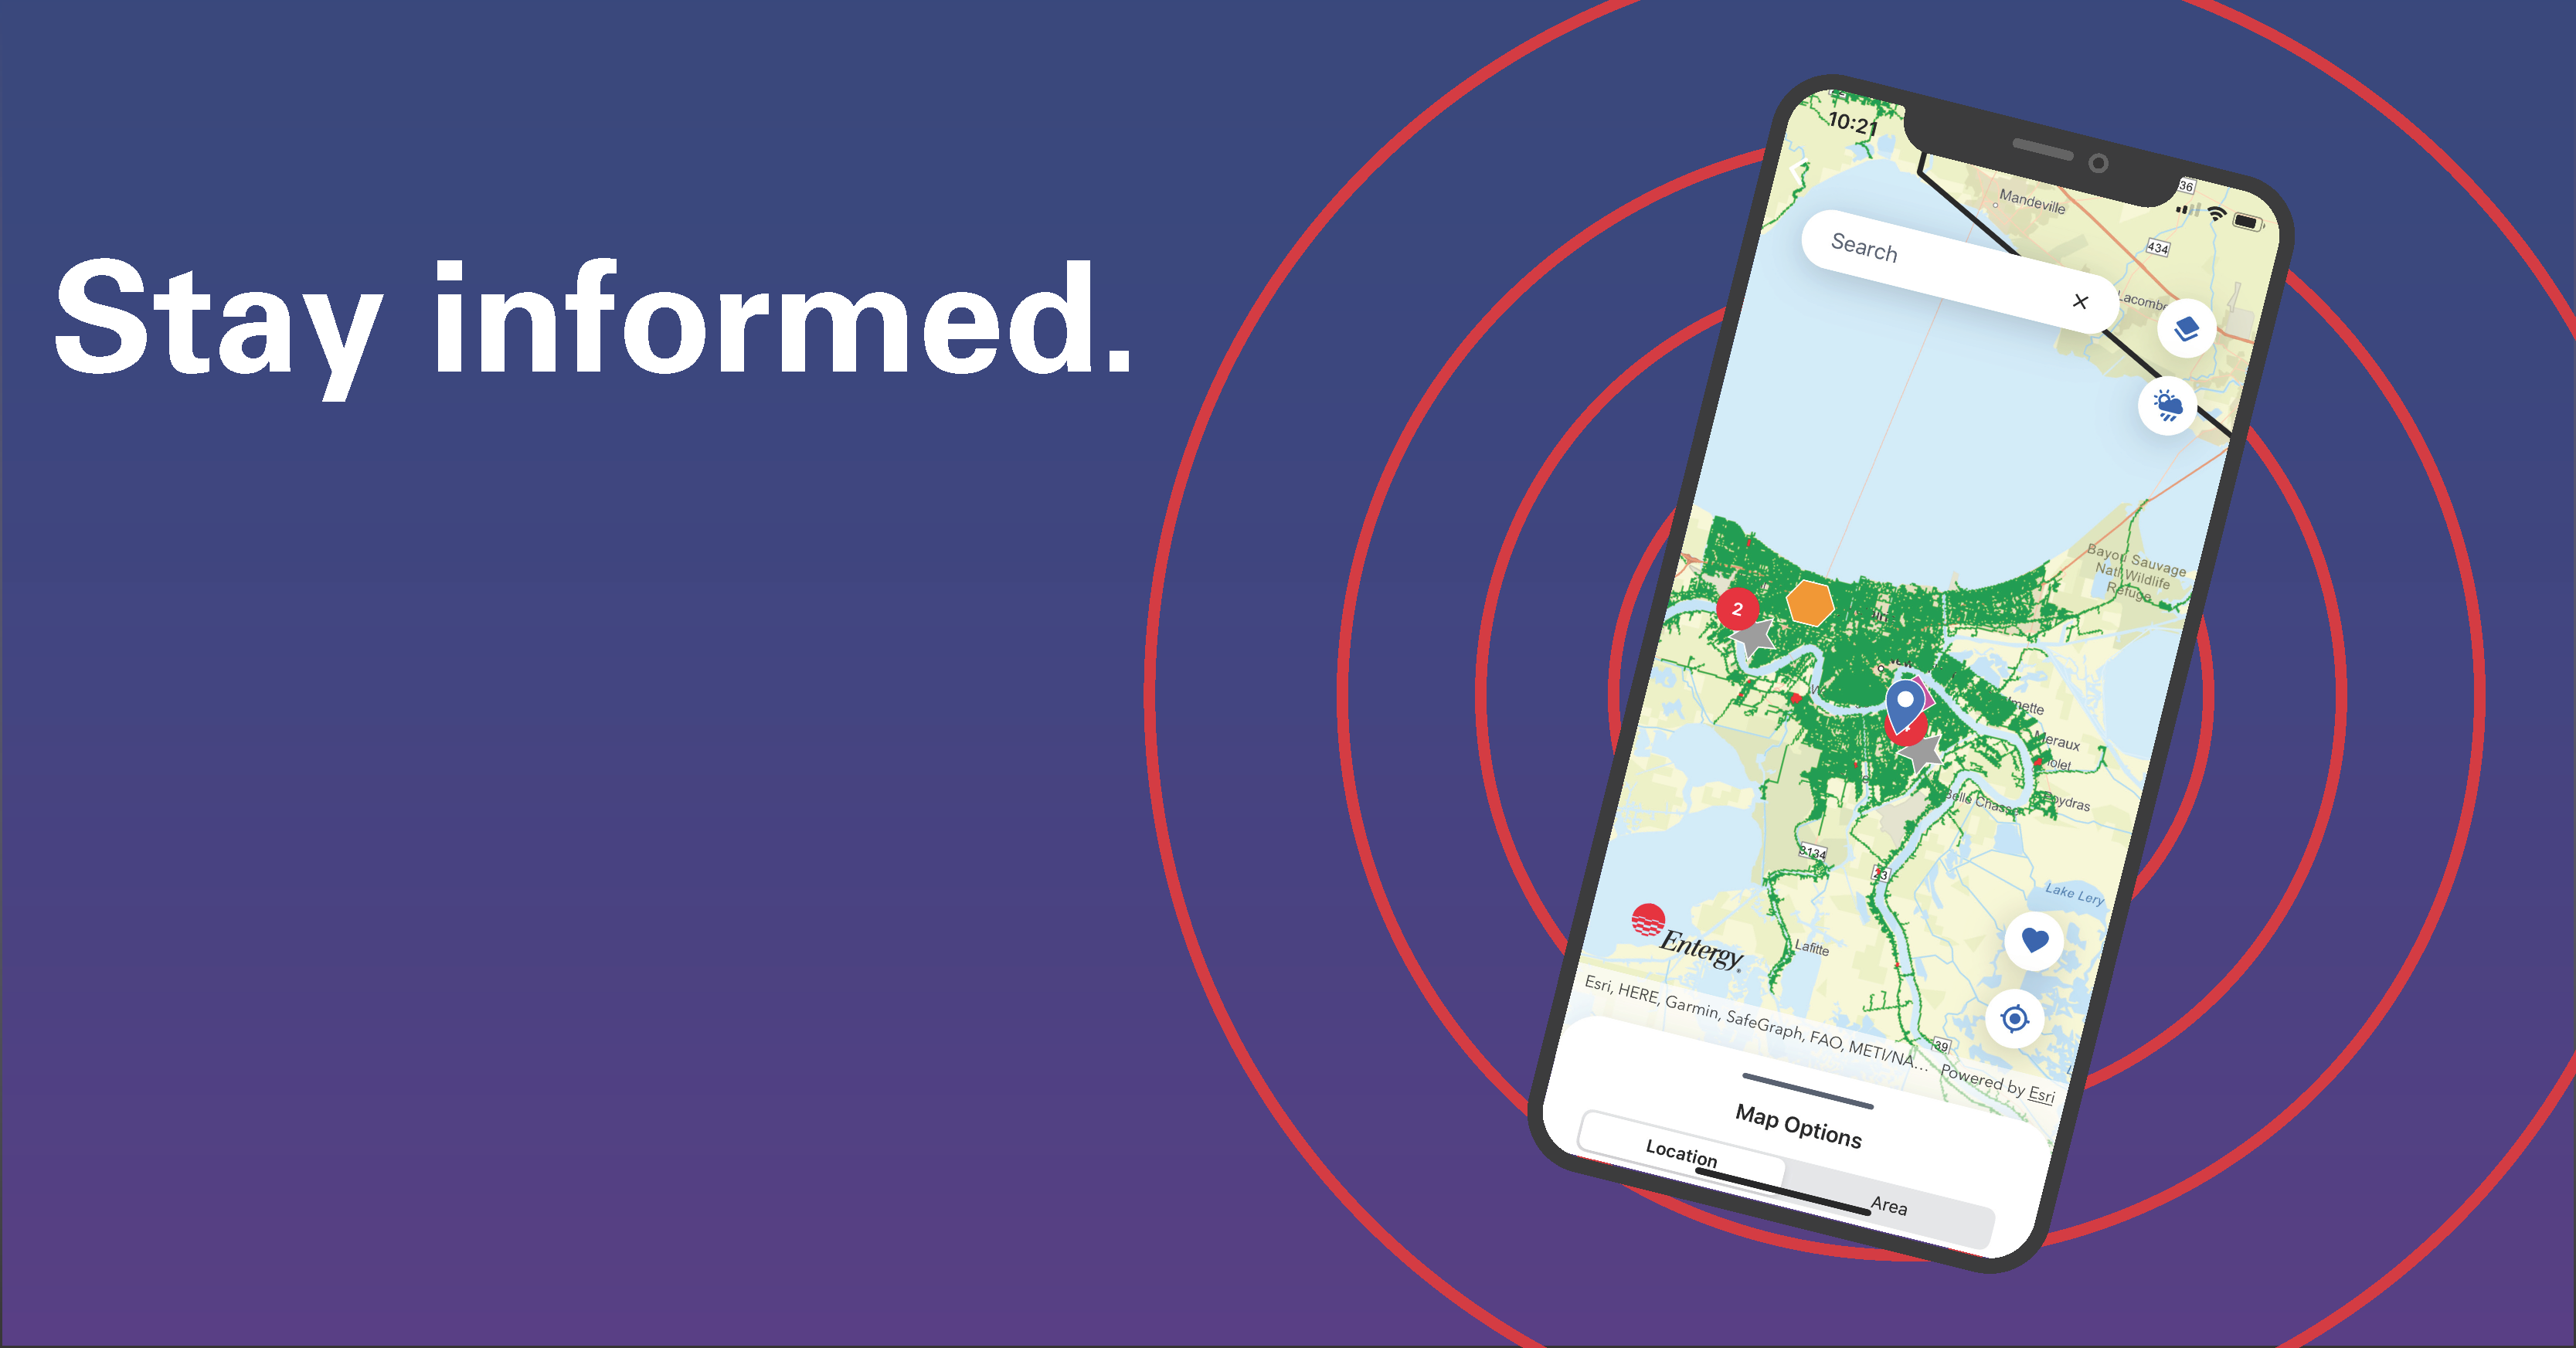 DOWNLOAD THE ENTERGY APP FOR MOST CURRENT STORM INFORMATION